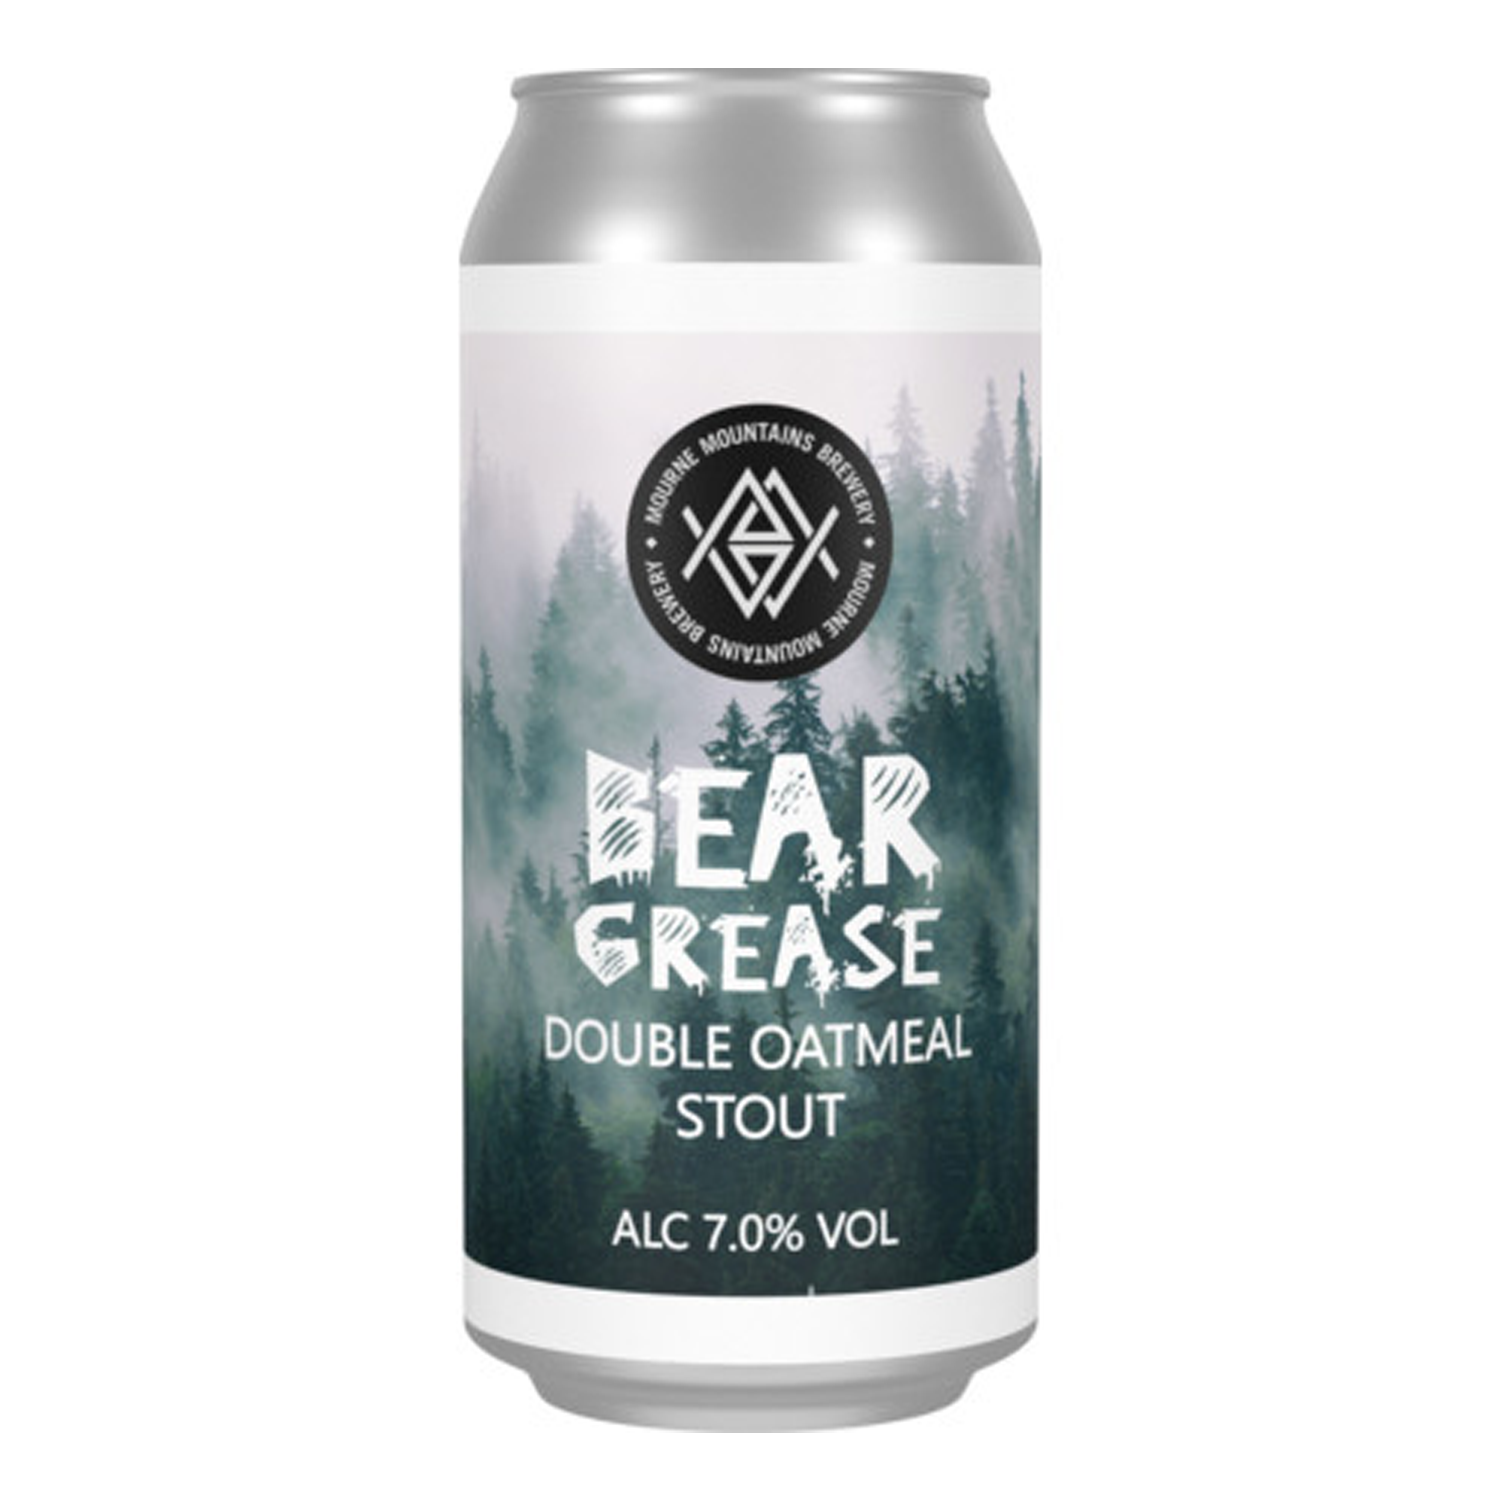 Mourne Mountains Bear Grease Double Oatmeal Stout